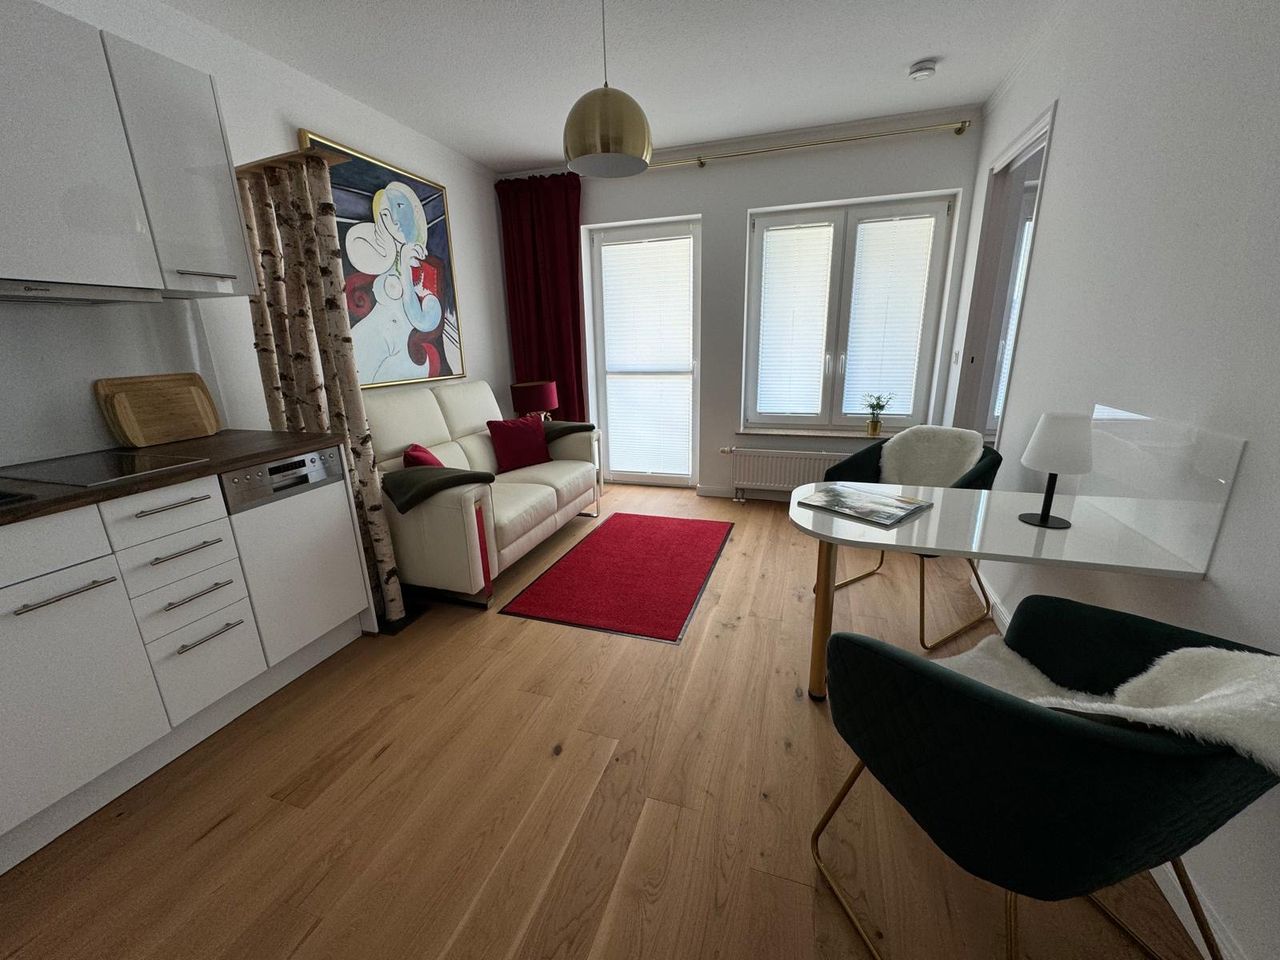 Great, lovely flat located in Rostock